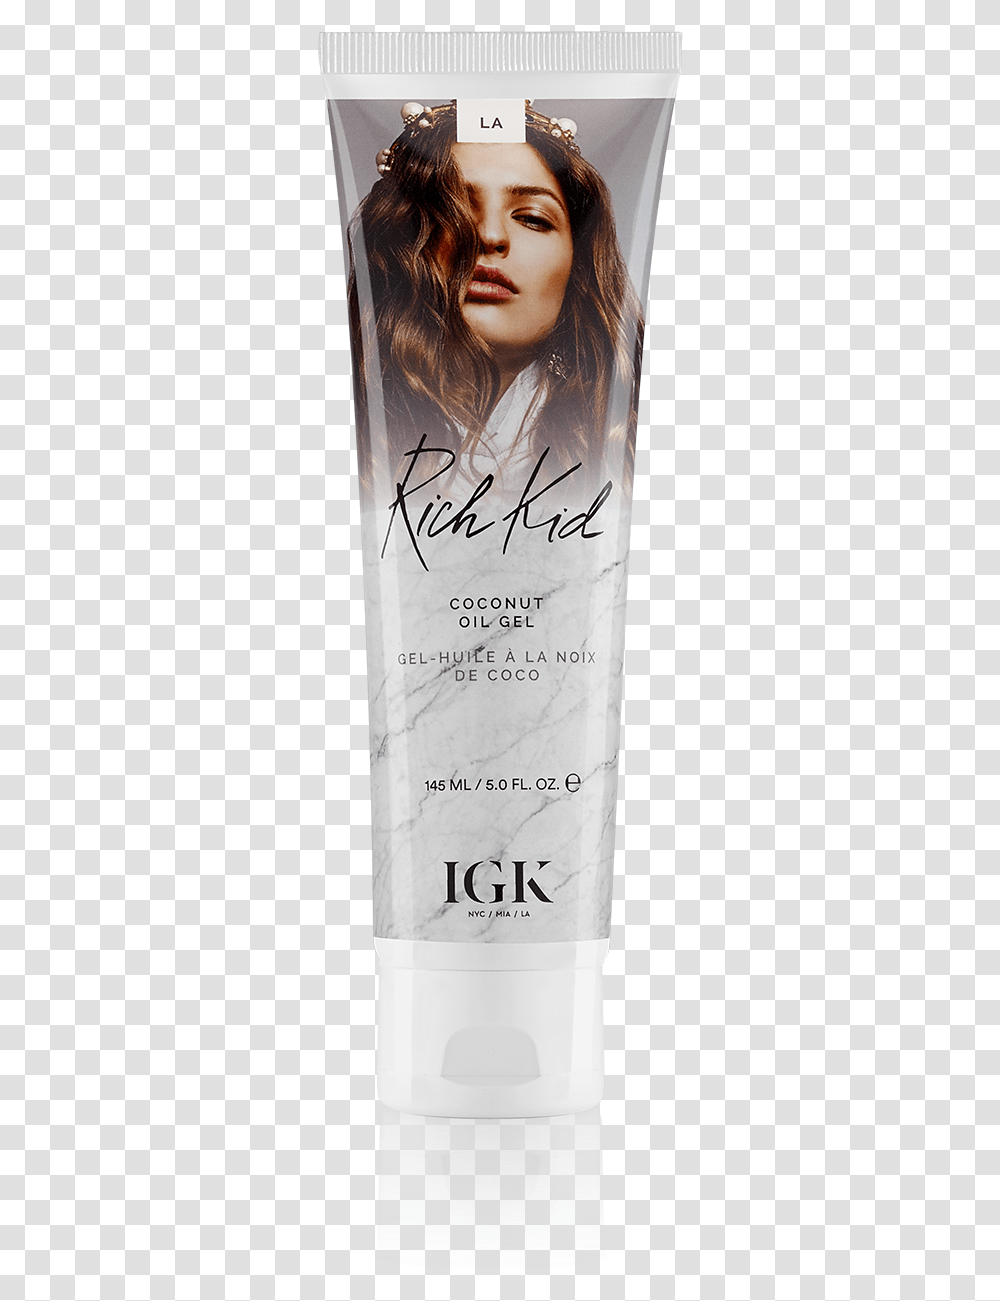 Igk Rich Kid Coconut Oil Gel, Person, Human, Handwriting Transparent Png